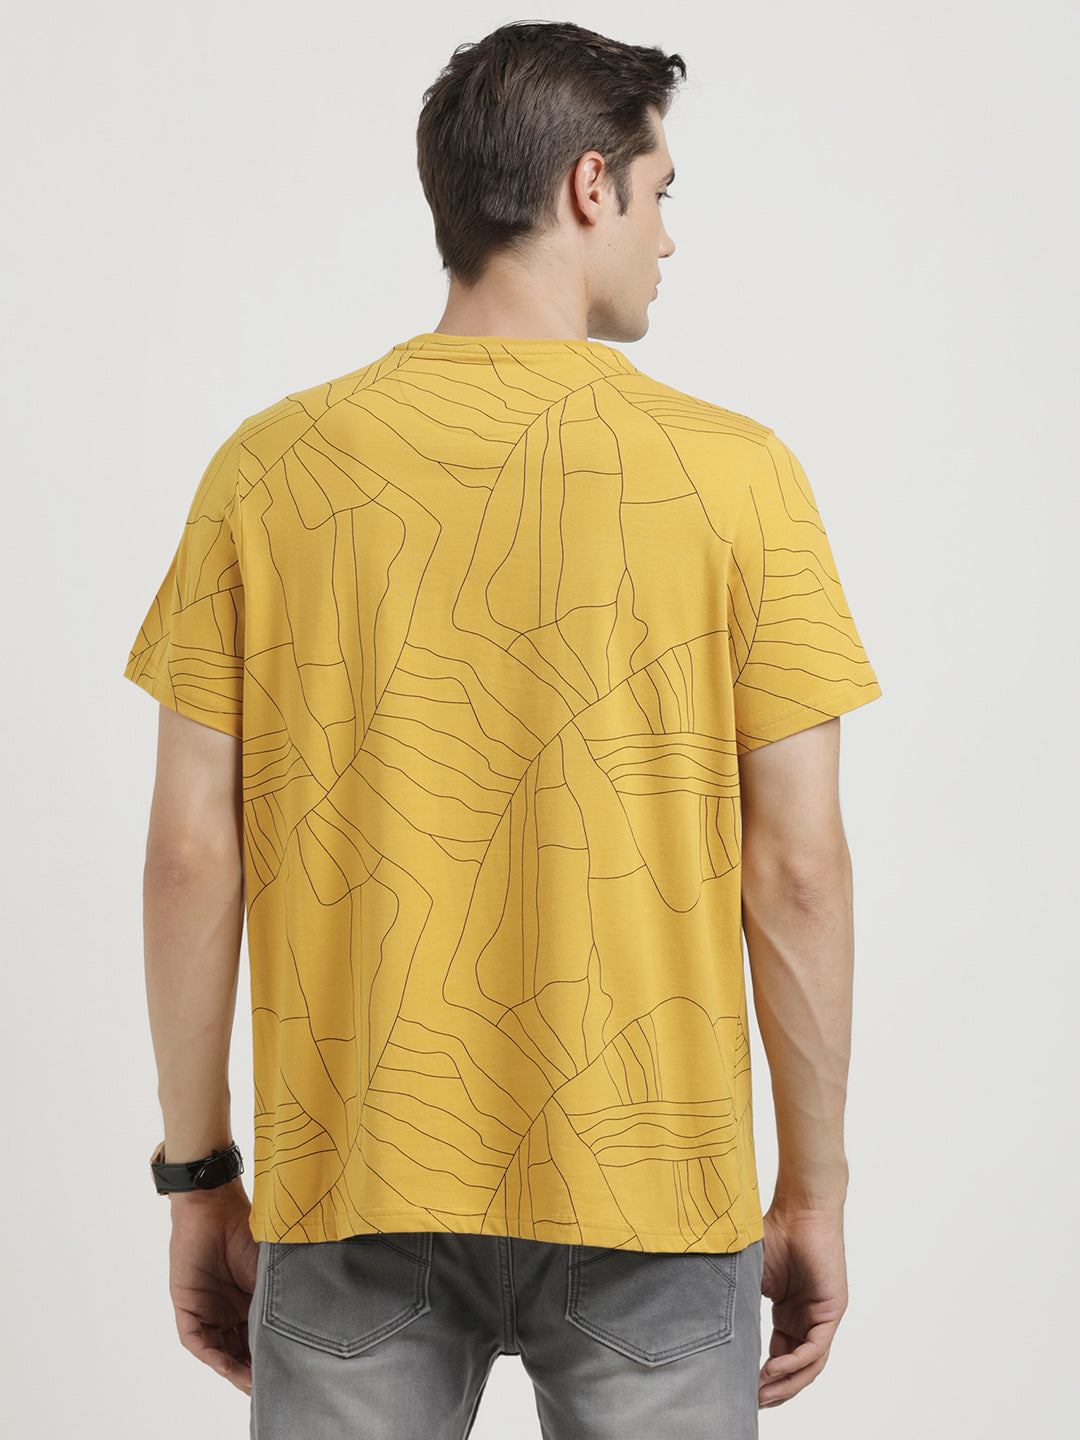 Knitted Mustard Printed Crew Neck Half Sleeve Casual T-Shirt